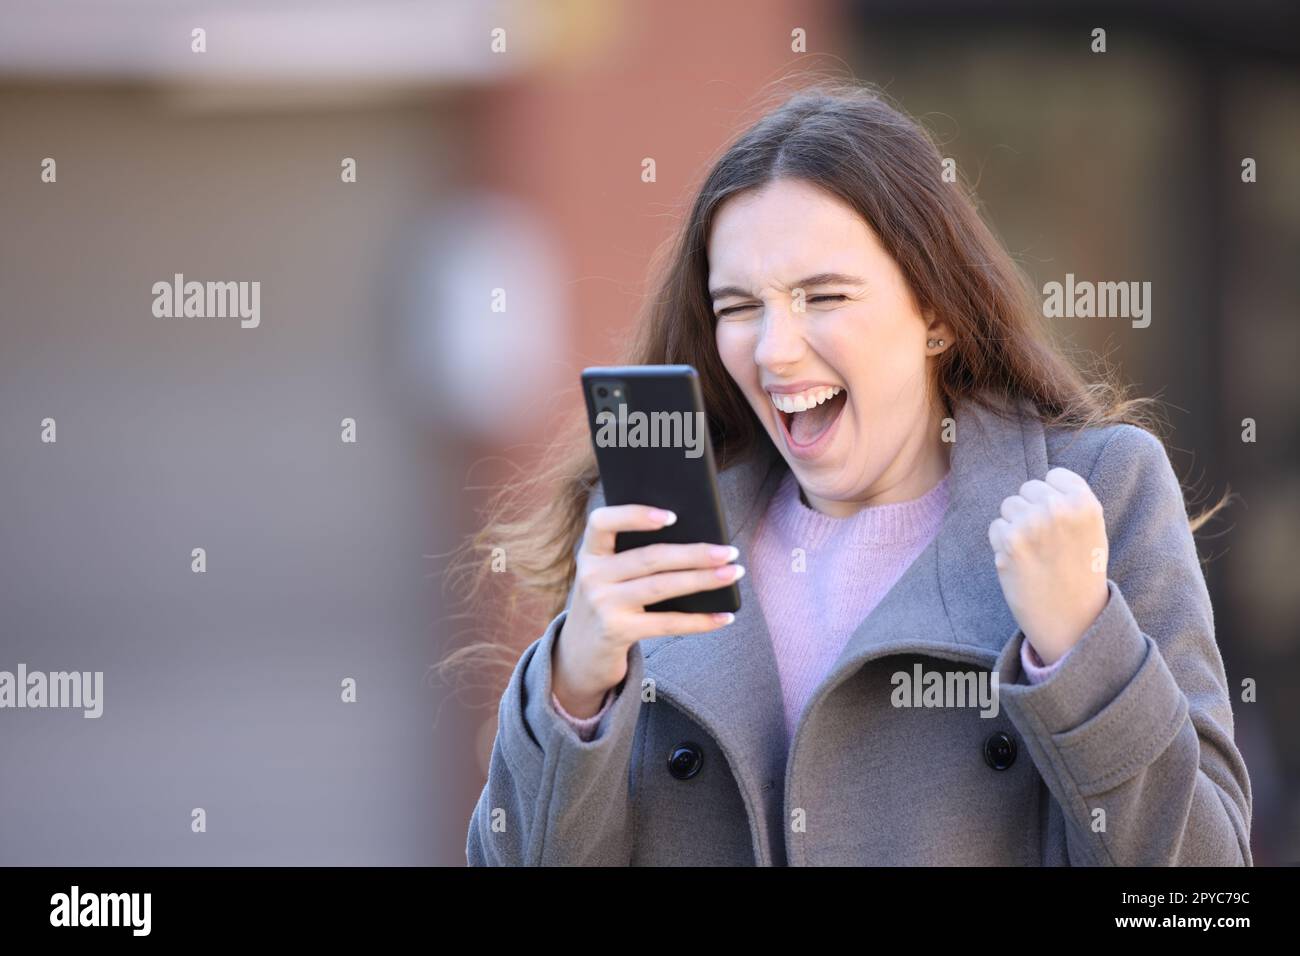 Excited woman celebrating good news holding phone Stock Photo